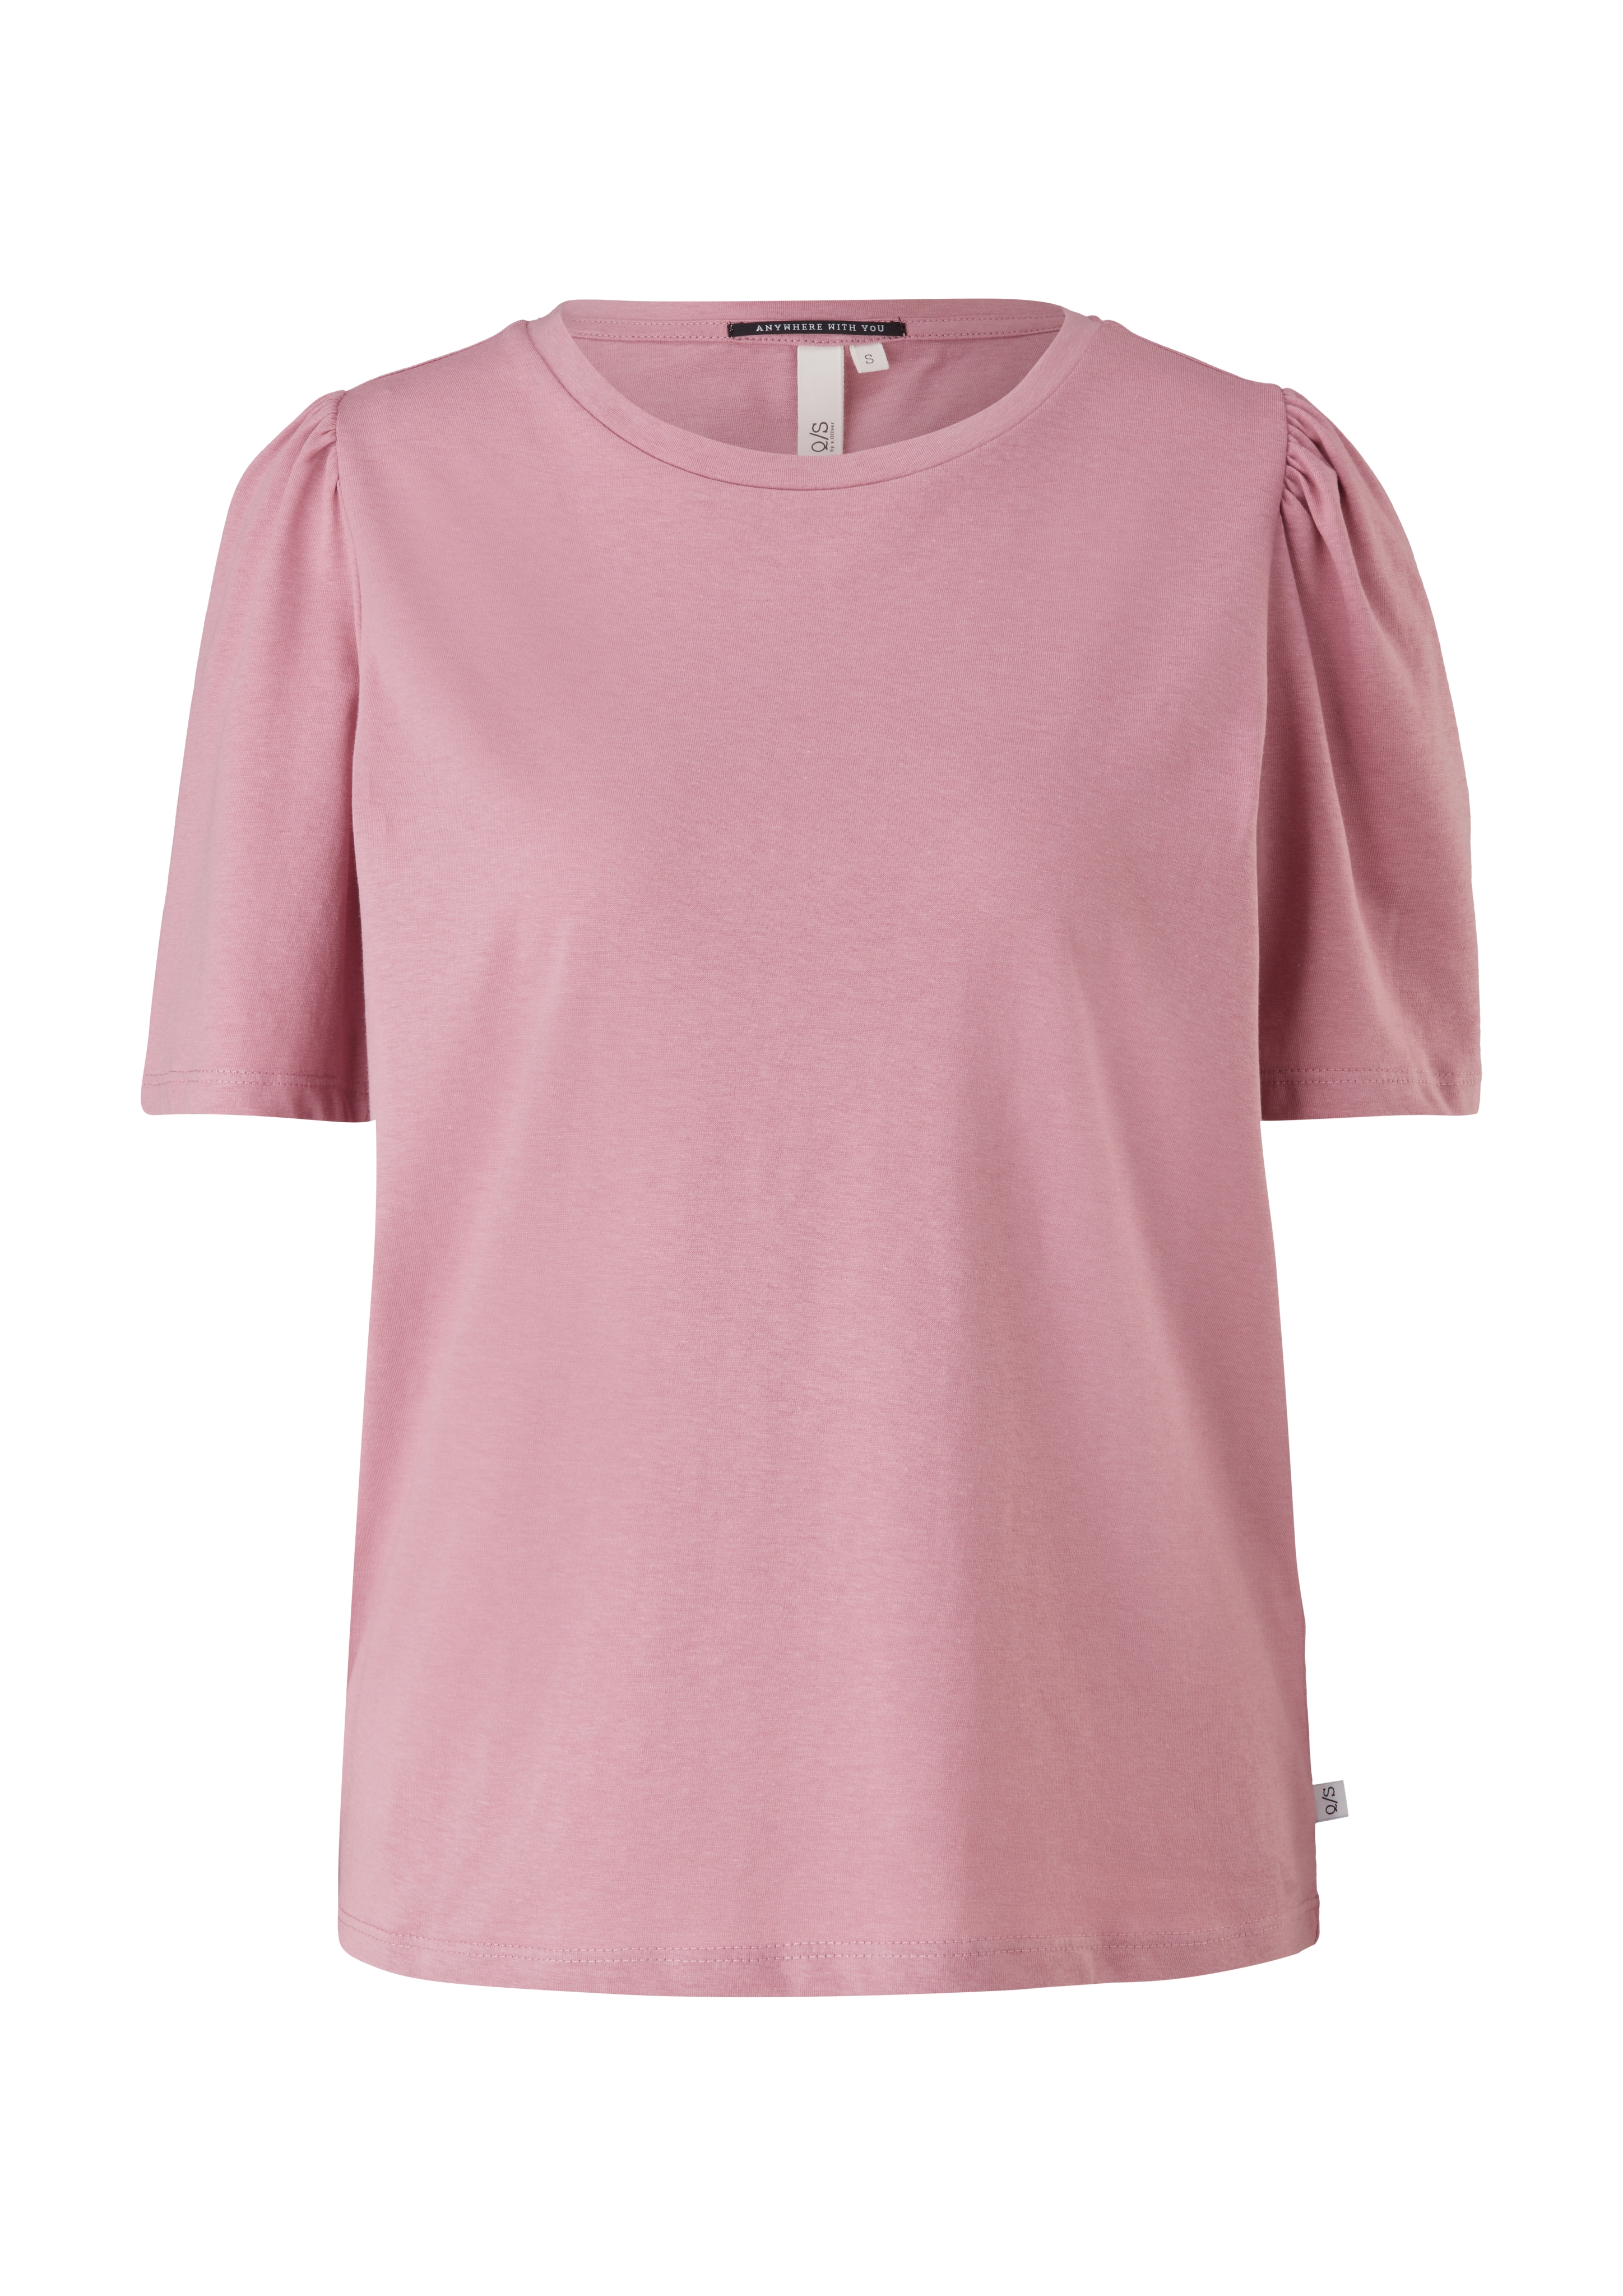 Q/S by s.Oliver Shirt in Rosa 